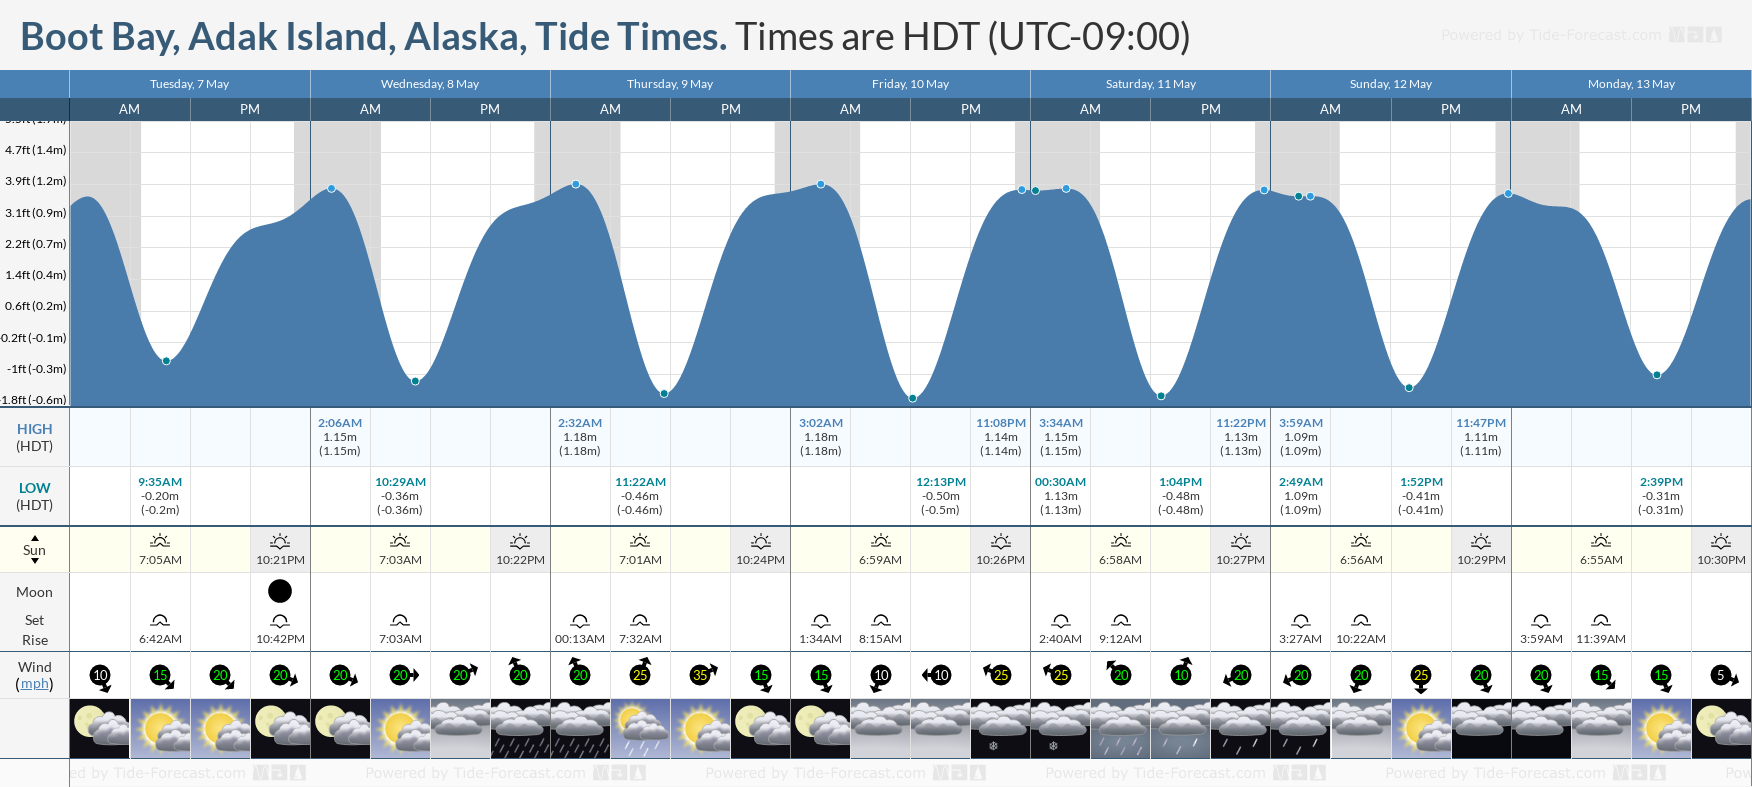 Boot Bay, Adak Island, Alaska Tide Chart including high and low tide tide times for the next 7 days